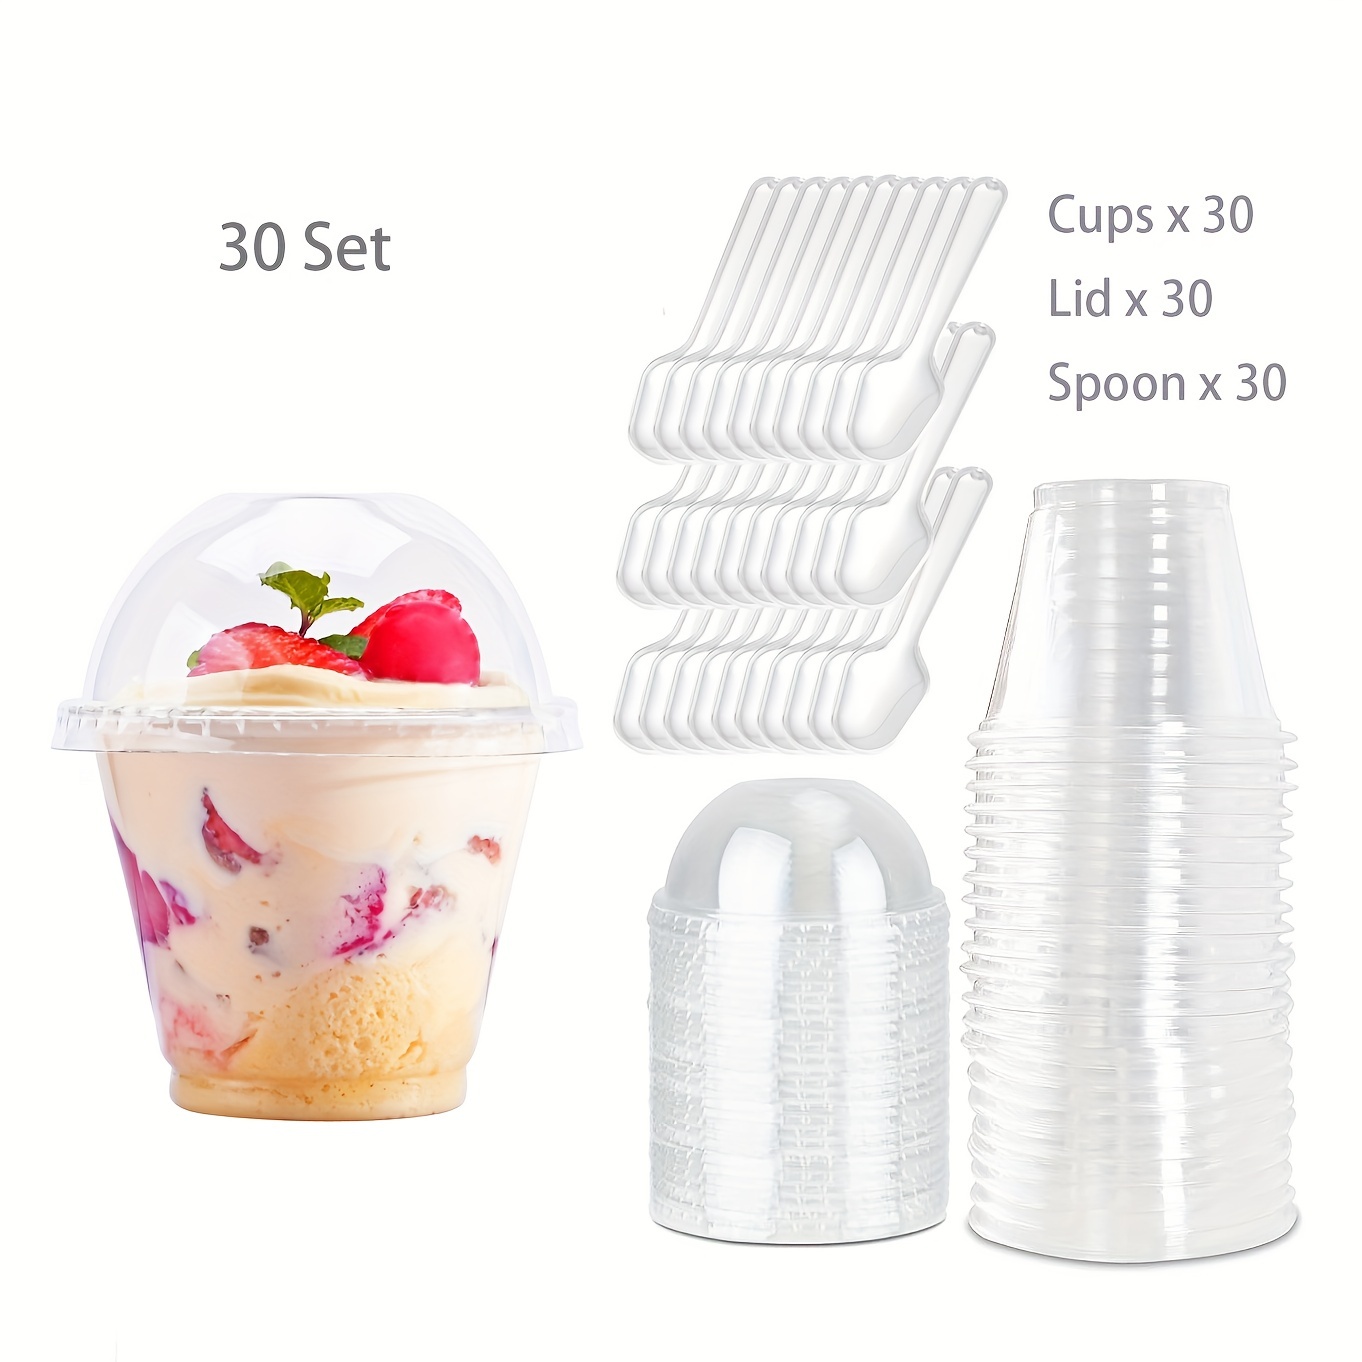 Fresh Salad Cup Set Contains Fork and Portion Cups with Lids,Lunch Box,Yogurt Shaker Cup,Parfait Pudding Dessert Cups,1000ml/33.8 fl.oz, White